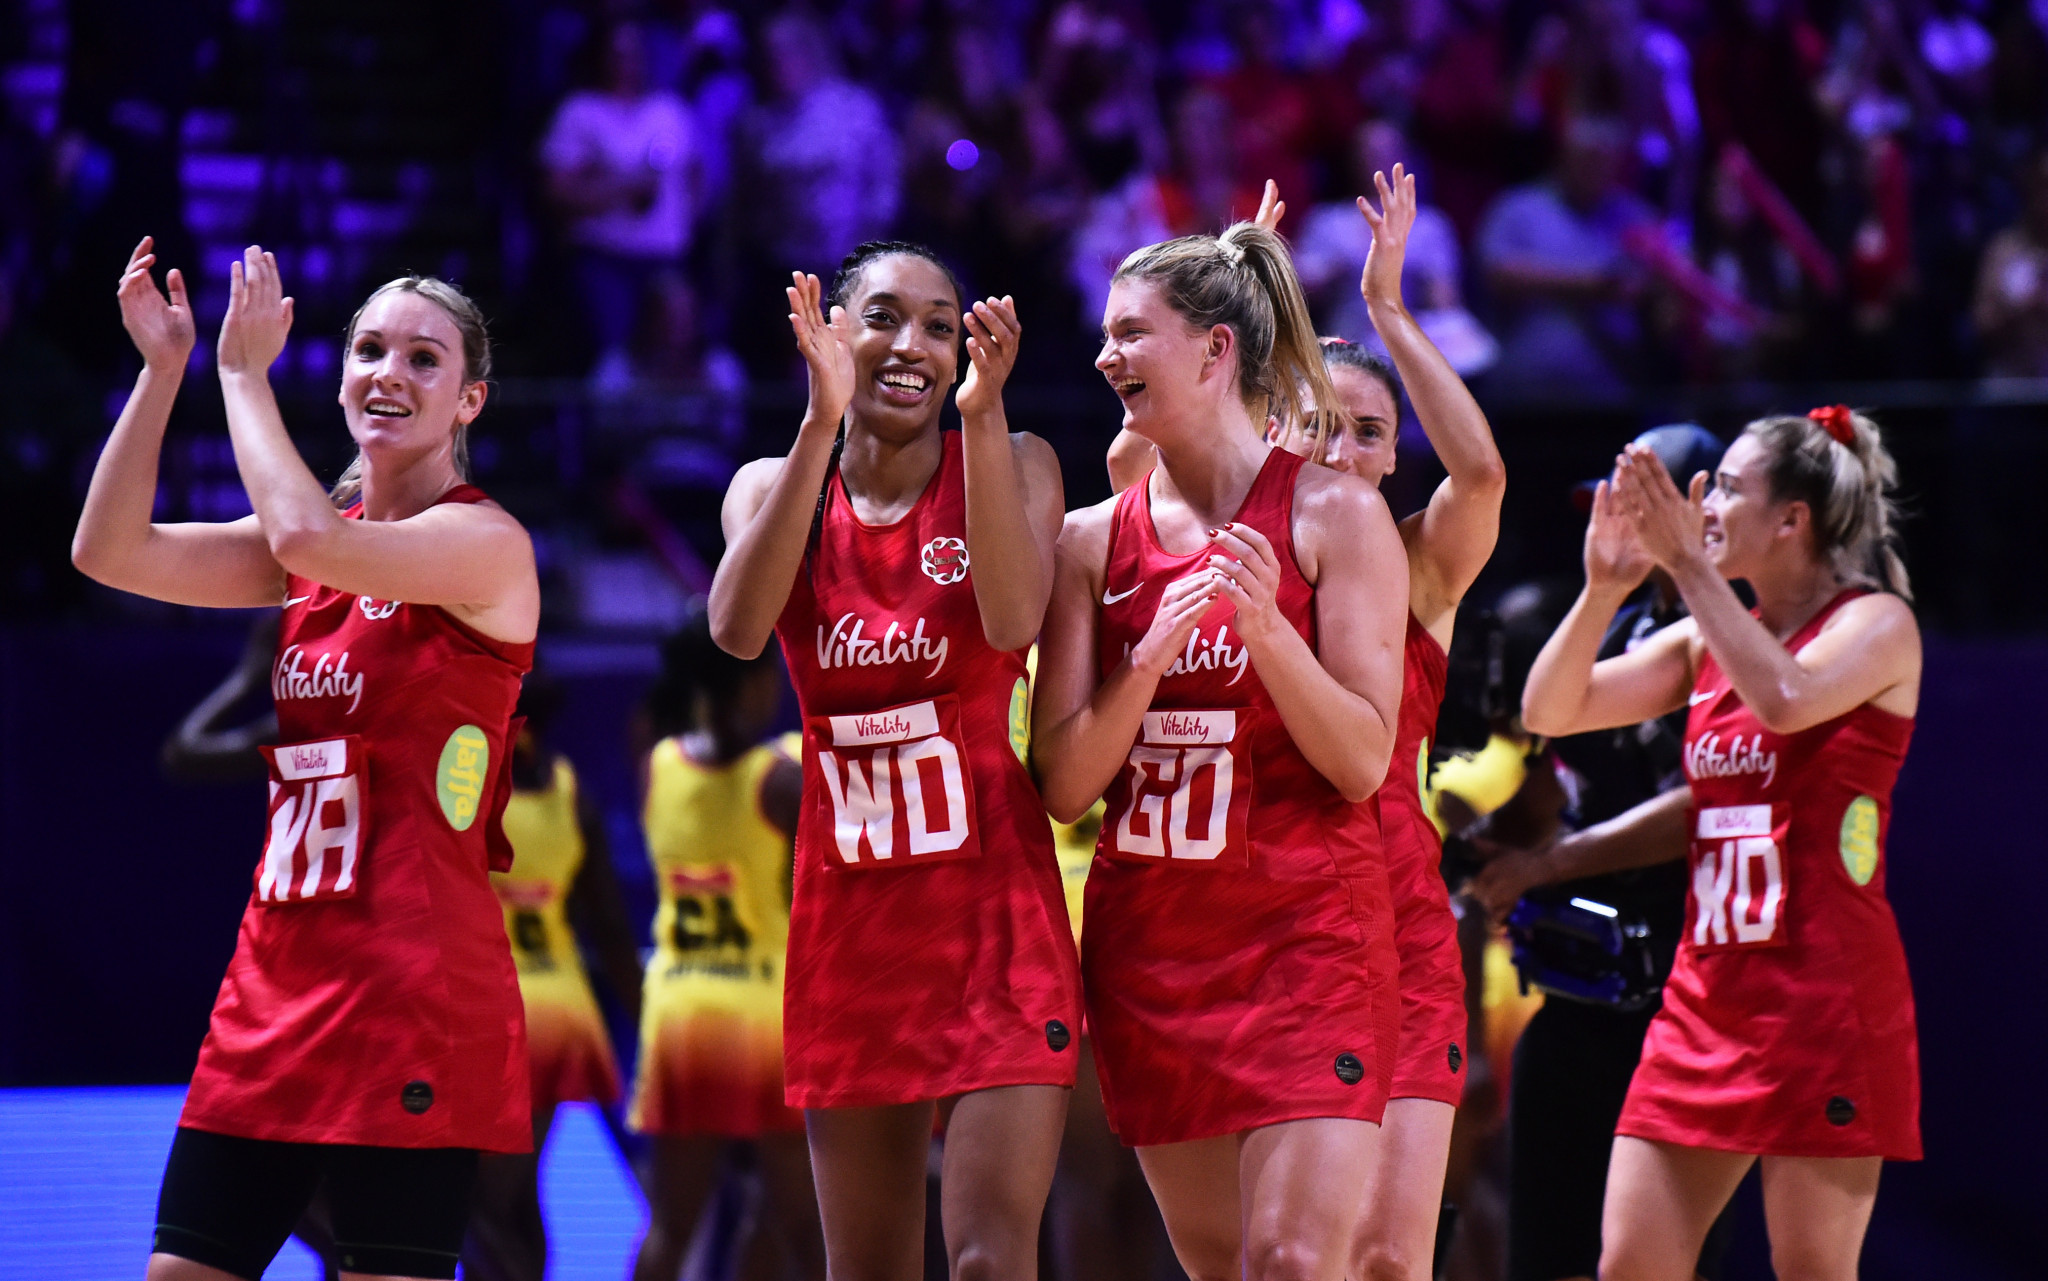 England Netball has extended its partnership with Red Bull until 2023 ©Getty Images